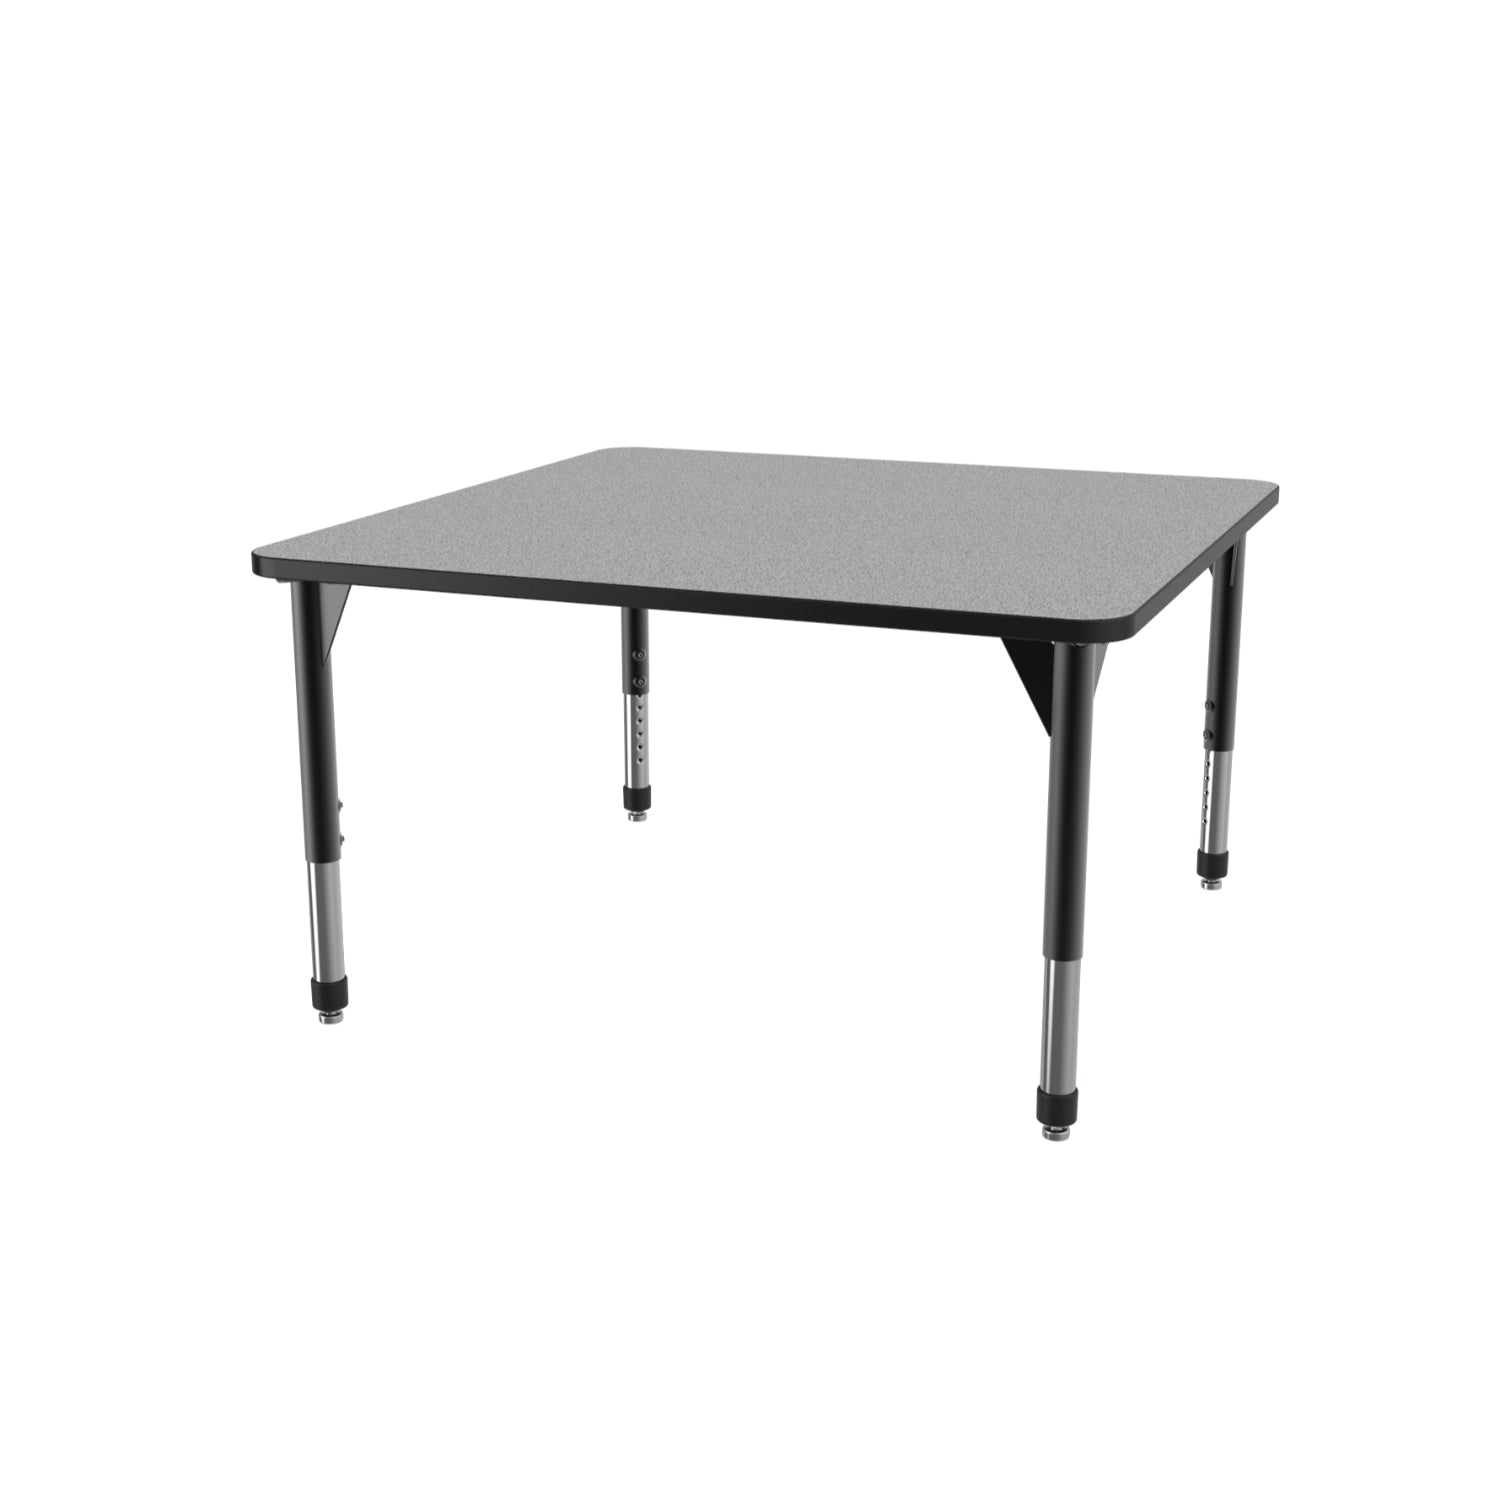 Premier Standing Height Collaborative Classroom Table, 48" Square